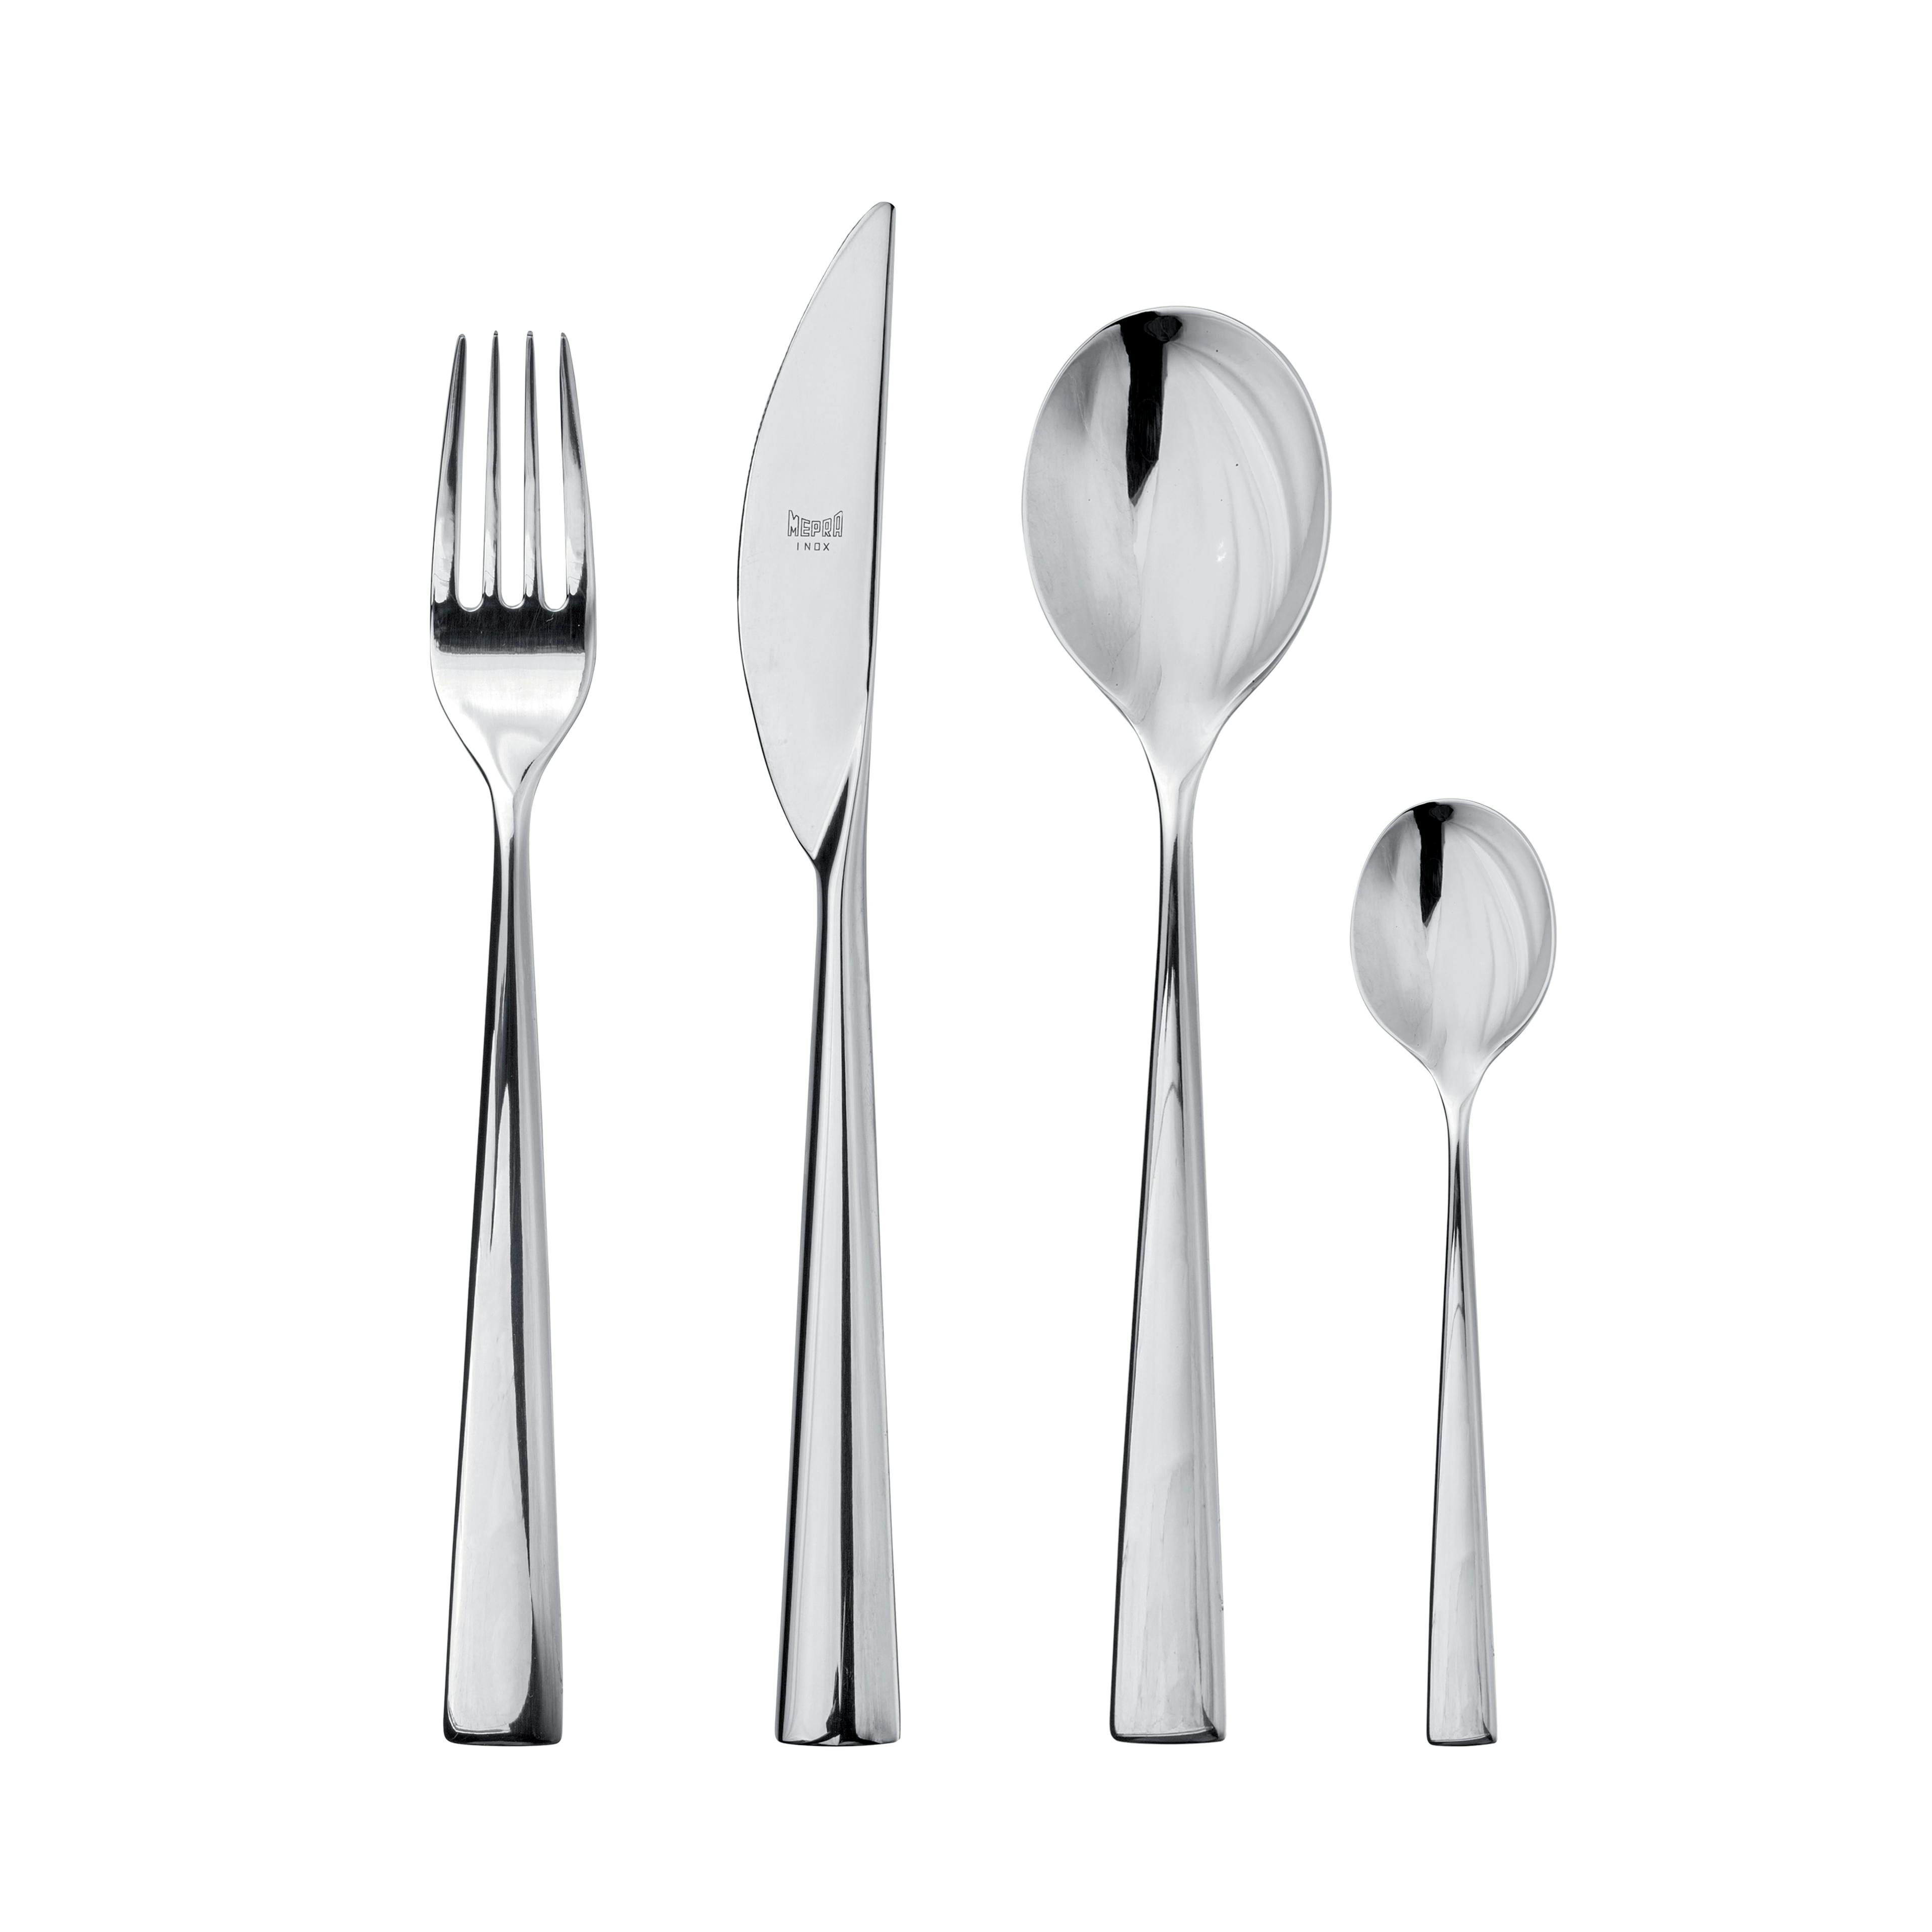 Energia Mirror Finish 24-Piece Stainless Steel Flatware Set, Service for 6